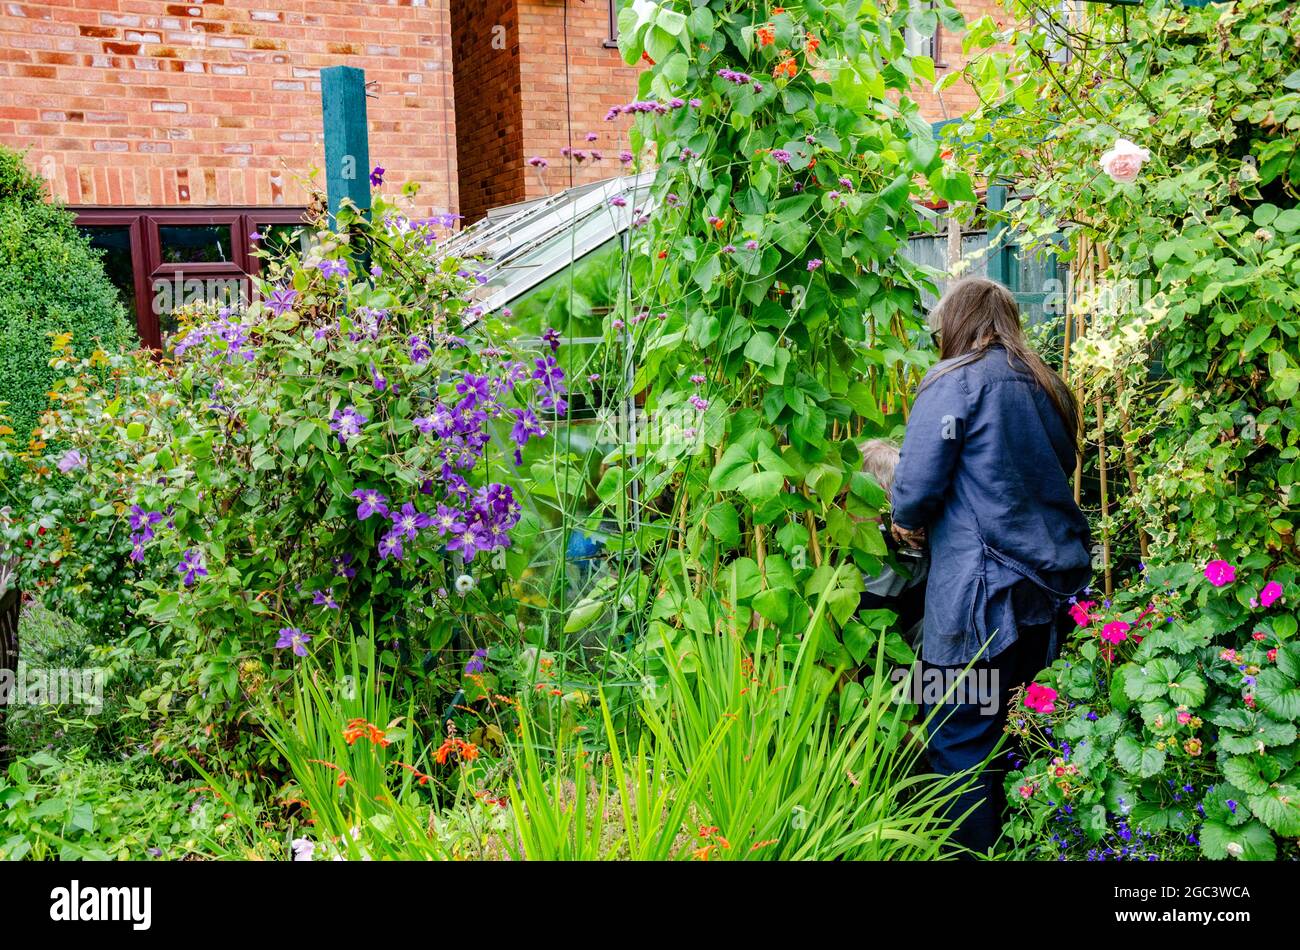 A retired lady picks homegrown runner beans which are growing in their garden and are ready to harvest, Stock Photo